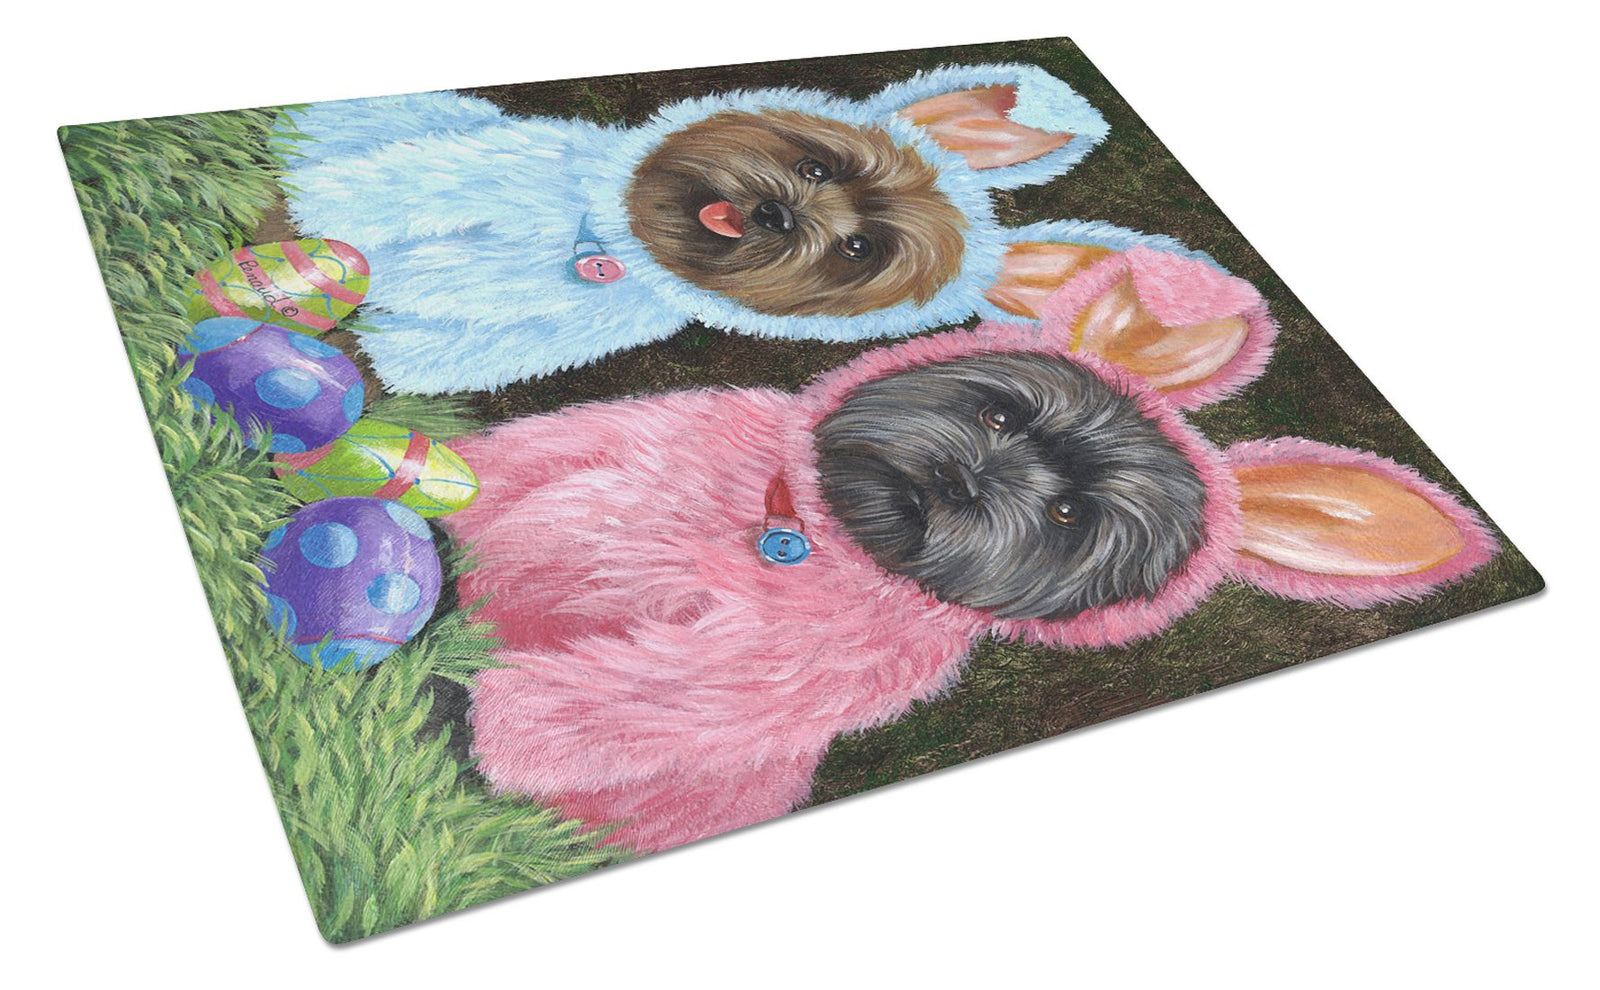 Cairn Terrier Easter Bunnies Glass Cutting Board Large PPP3046LCB by Caroline's Treasures